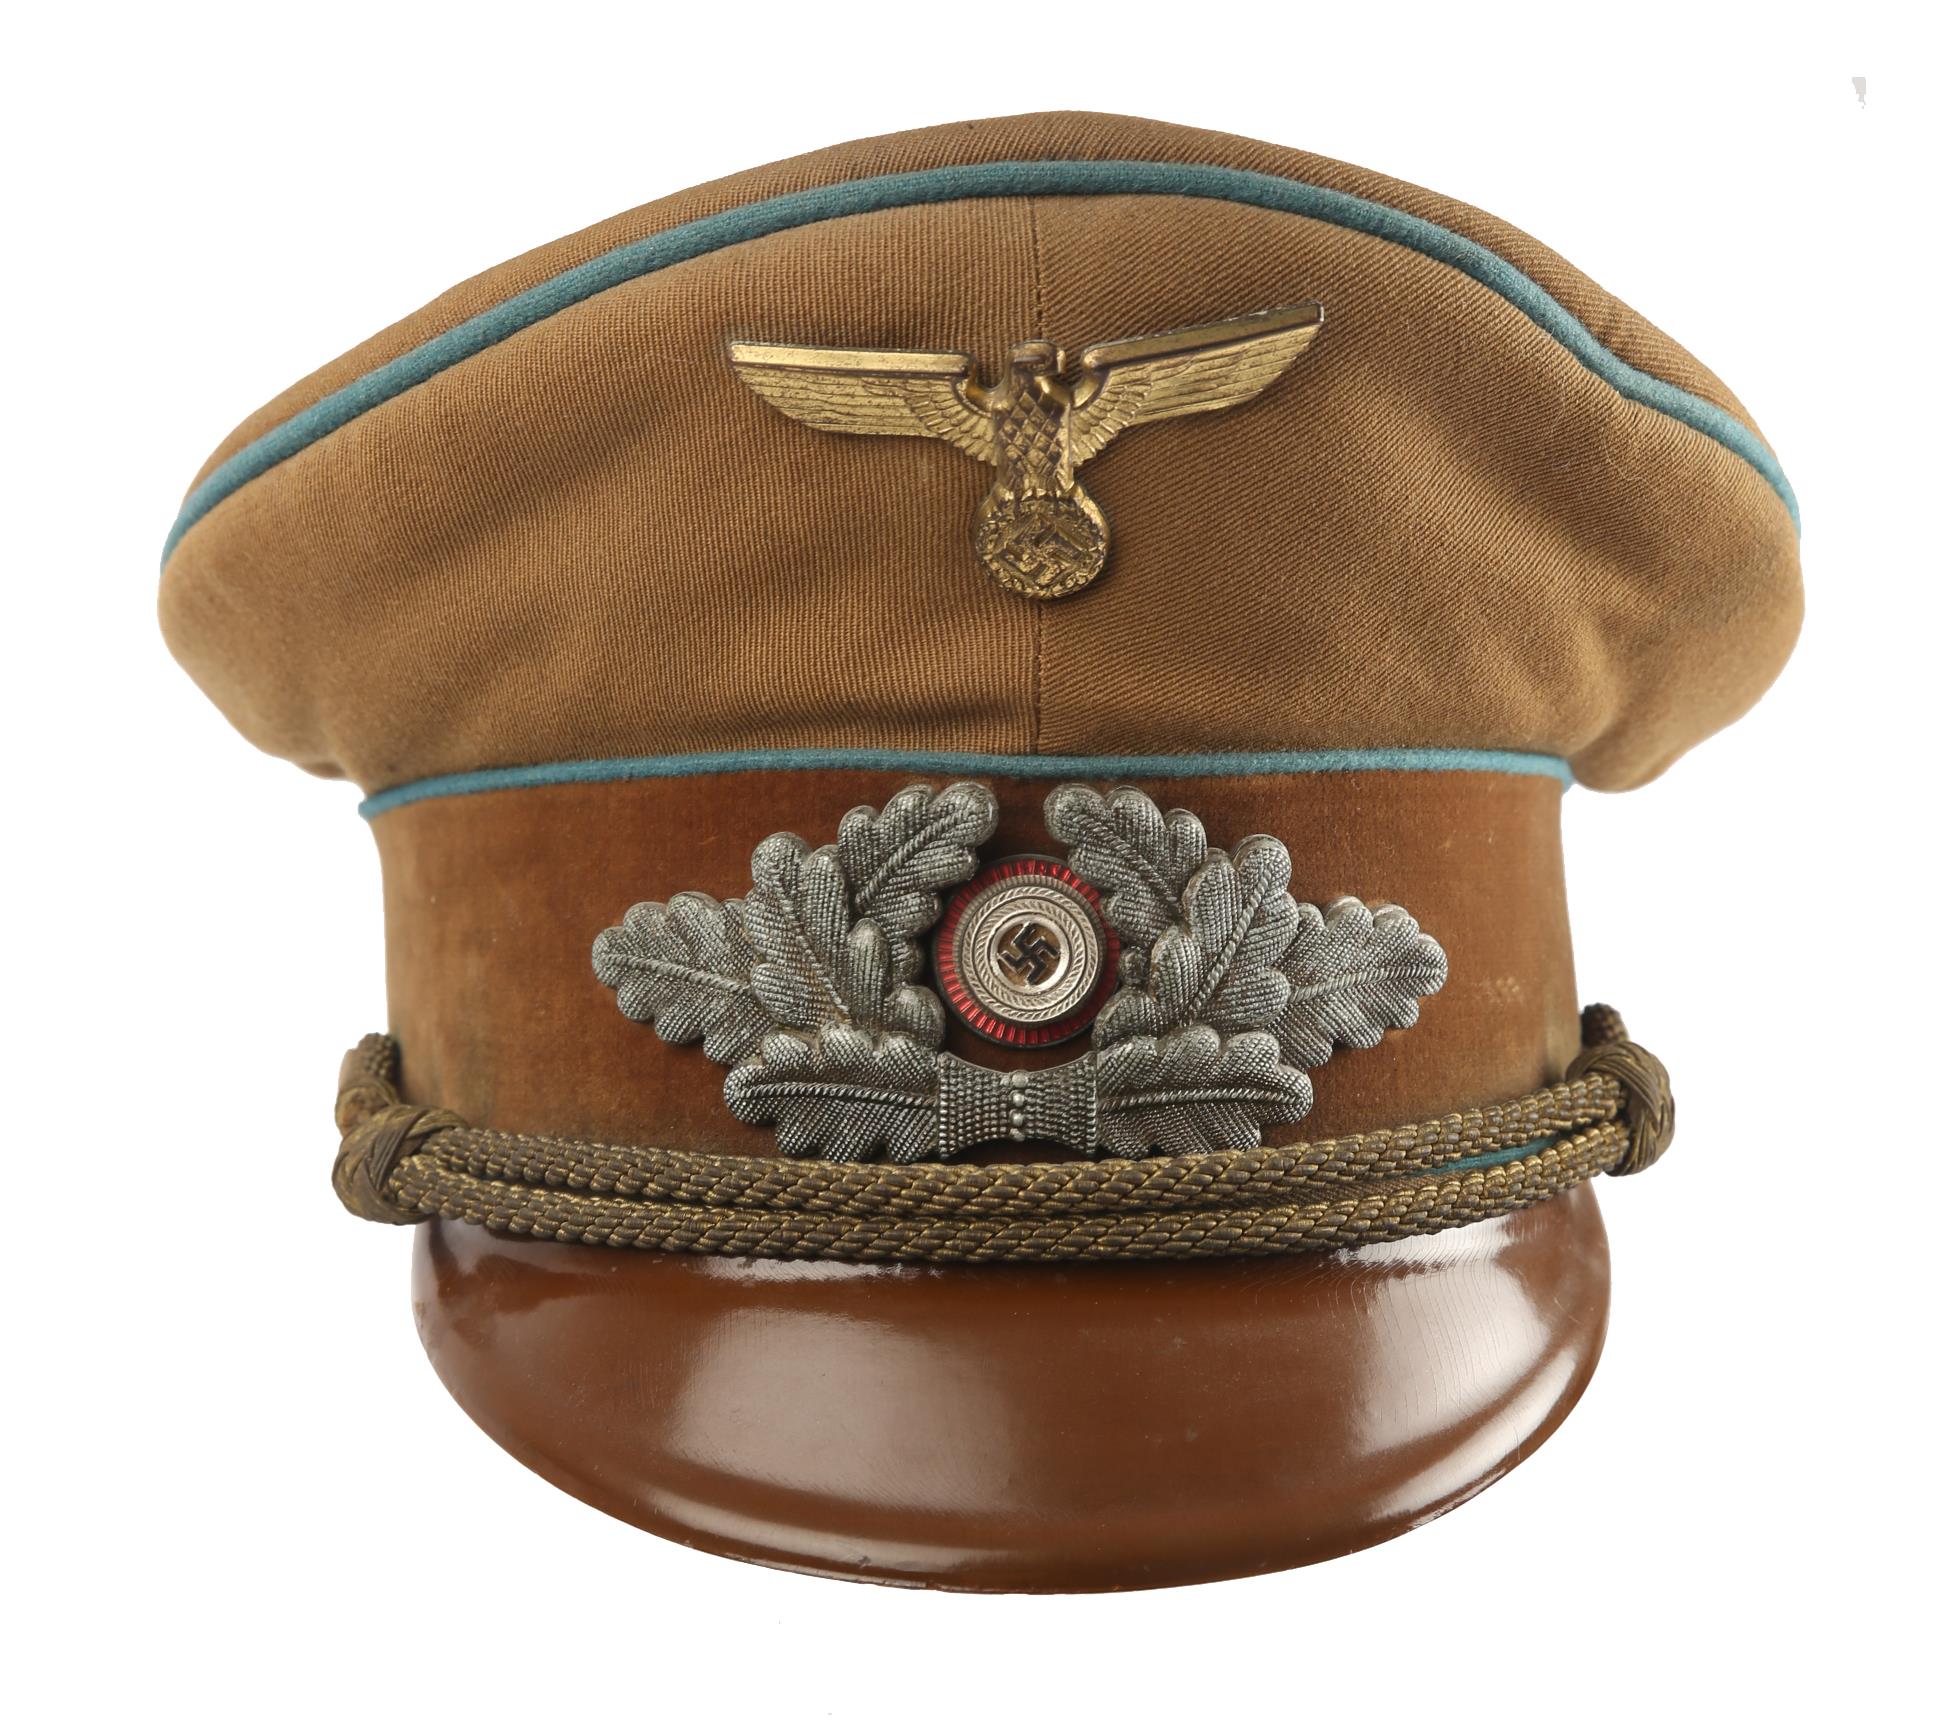 1933-45 German NSDAP Political Leader's visor cap, of tan coloured cloth with blue piping, brown - Image 2 of 5